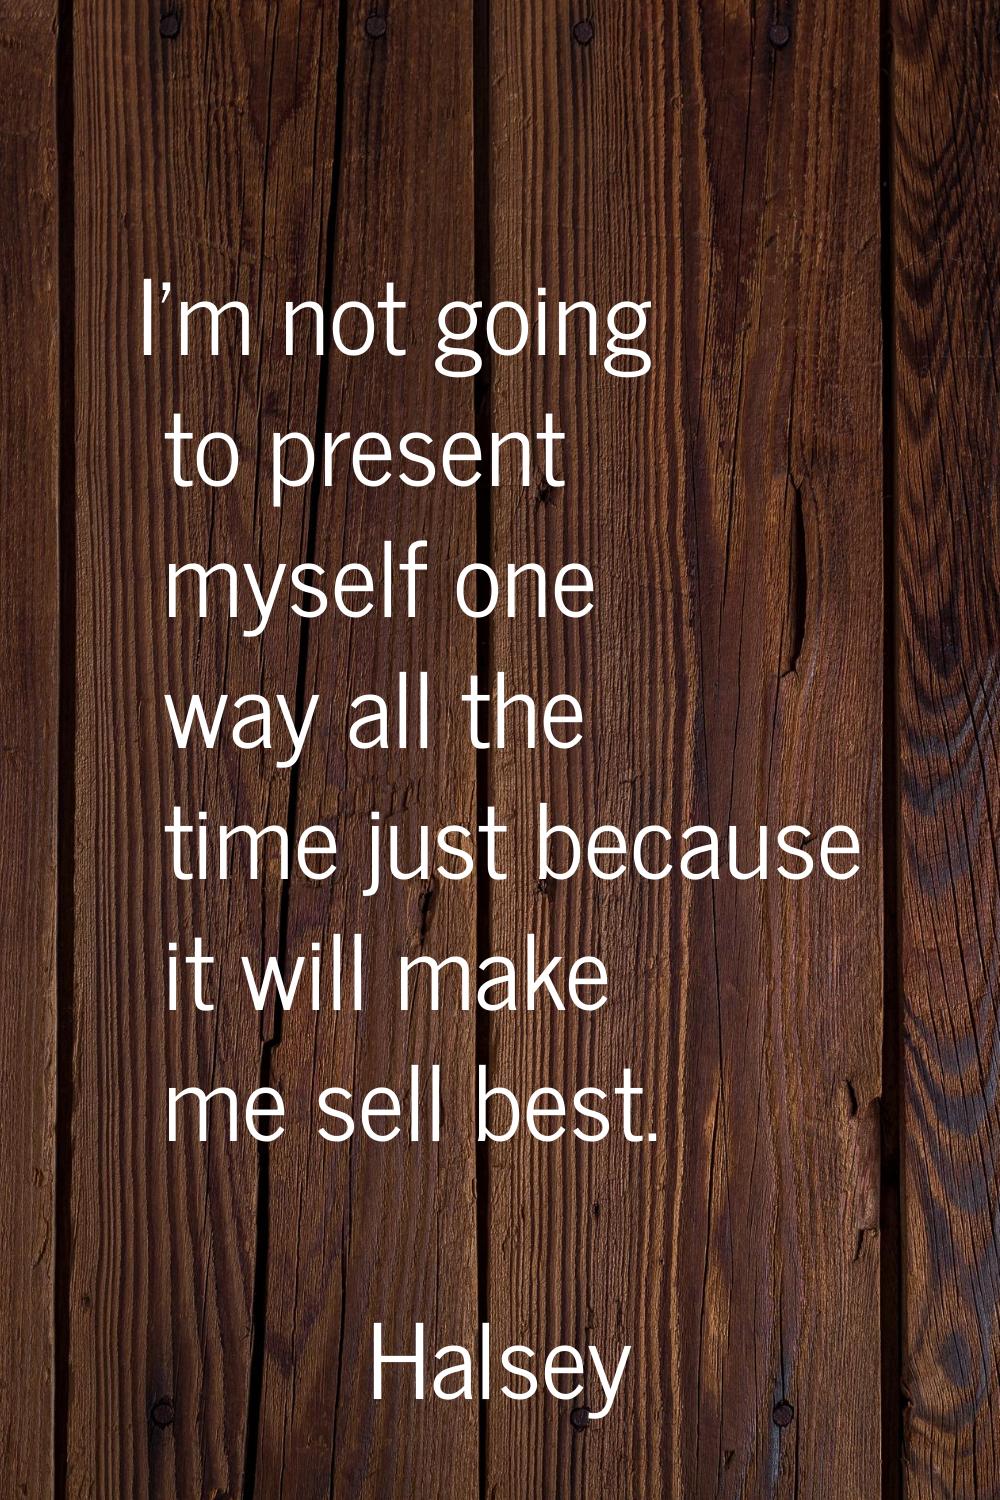 I'm not going to present myself one way all the time just because it will make me sell best.